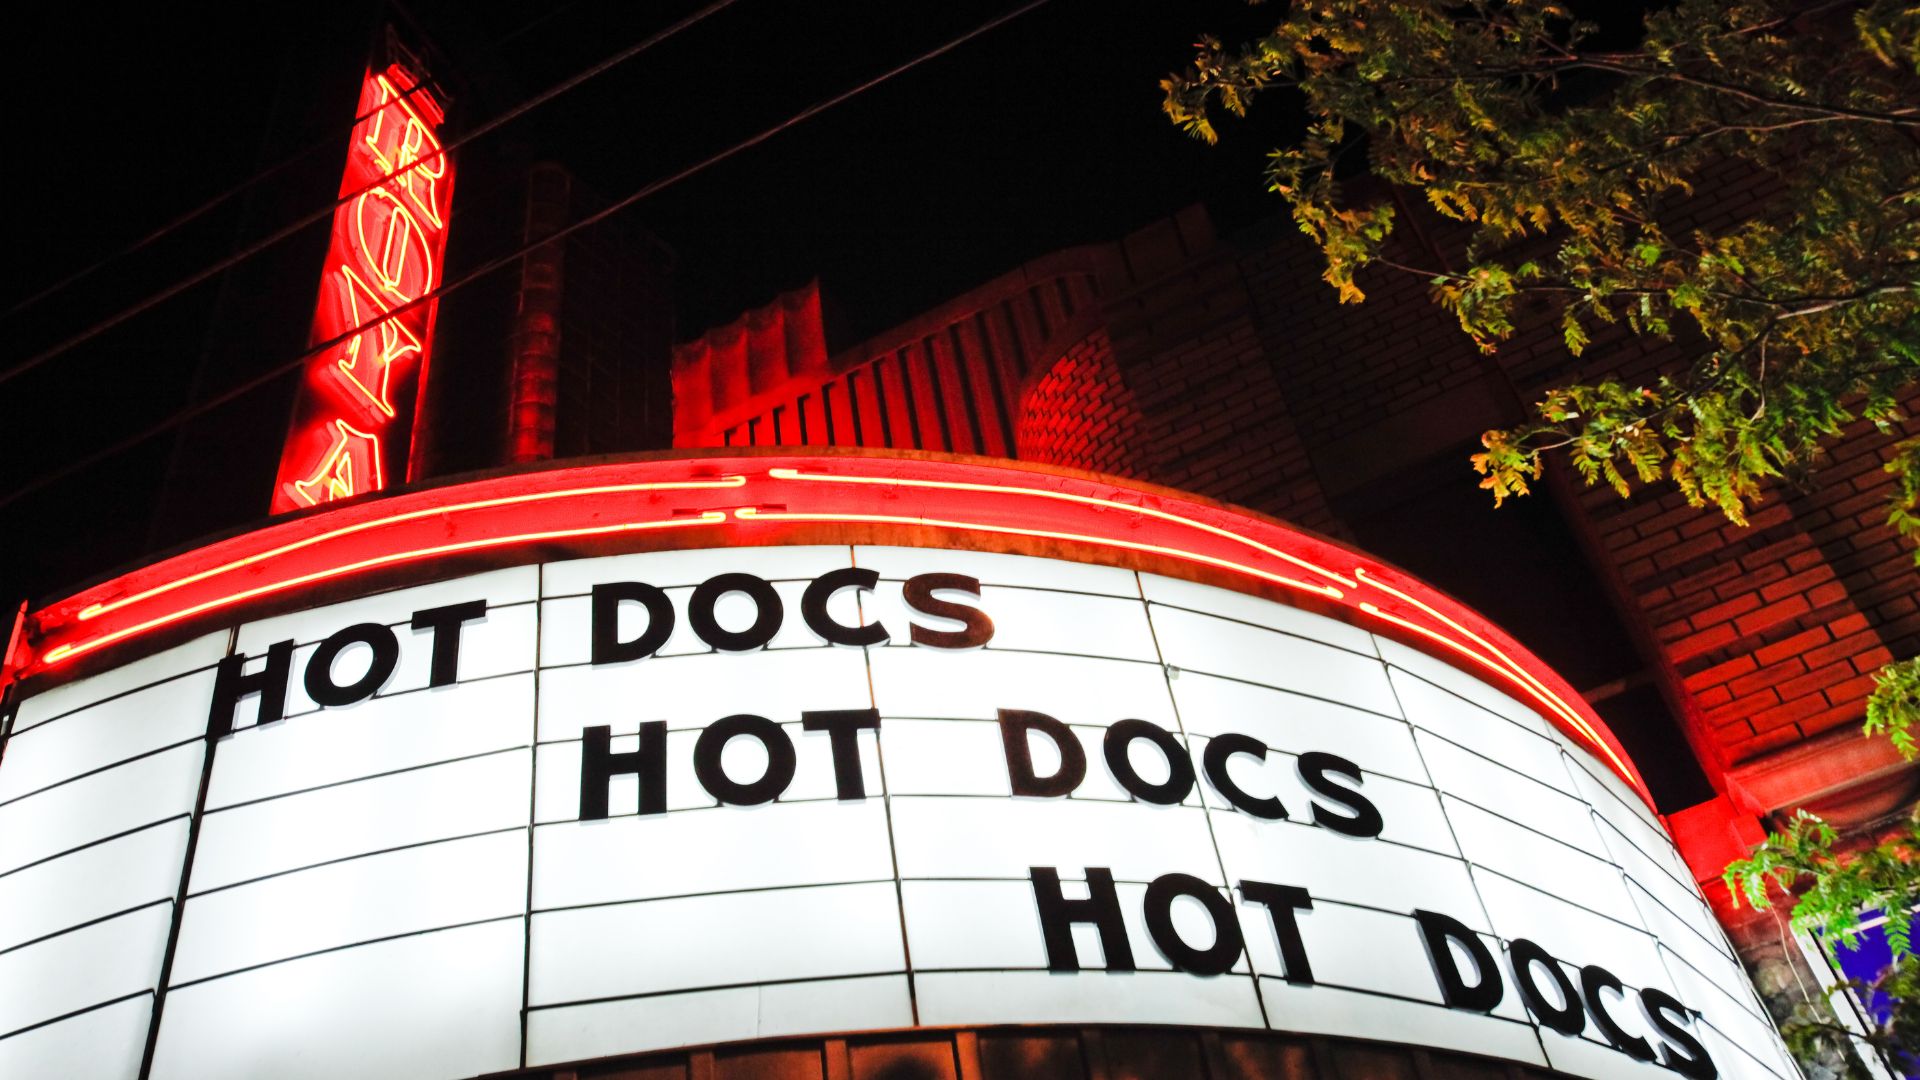 Hot Docs marquee at the Royal